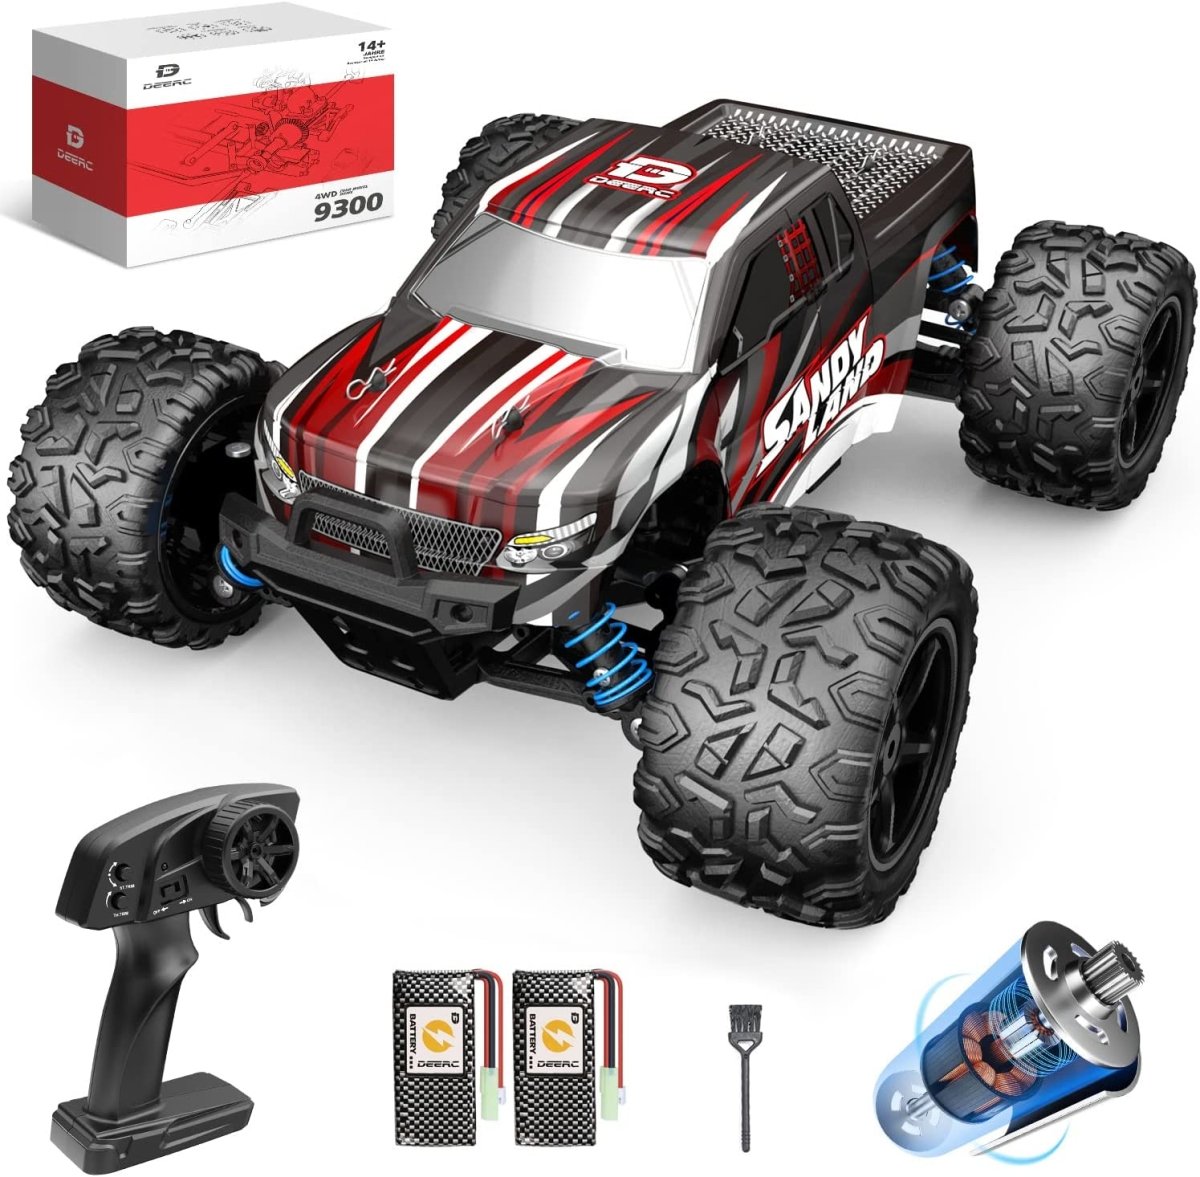 DEERC RC Car High Speed Remote Control Car 1:18 Scale 4WD Off Road Monster Truck